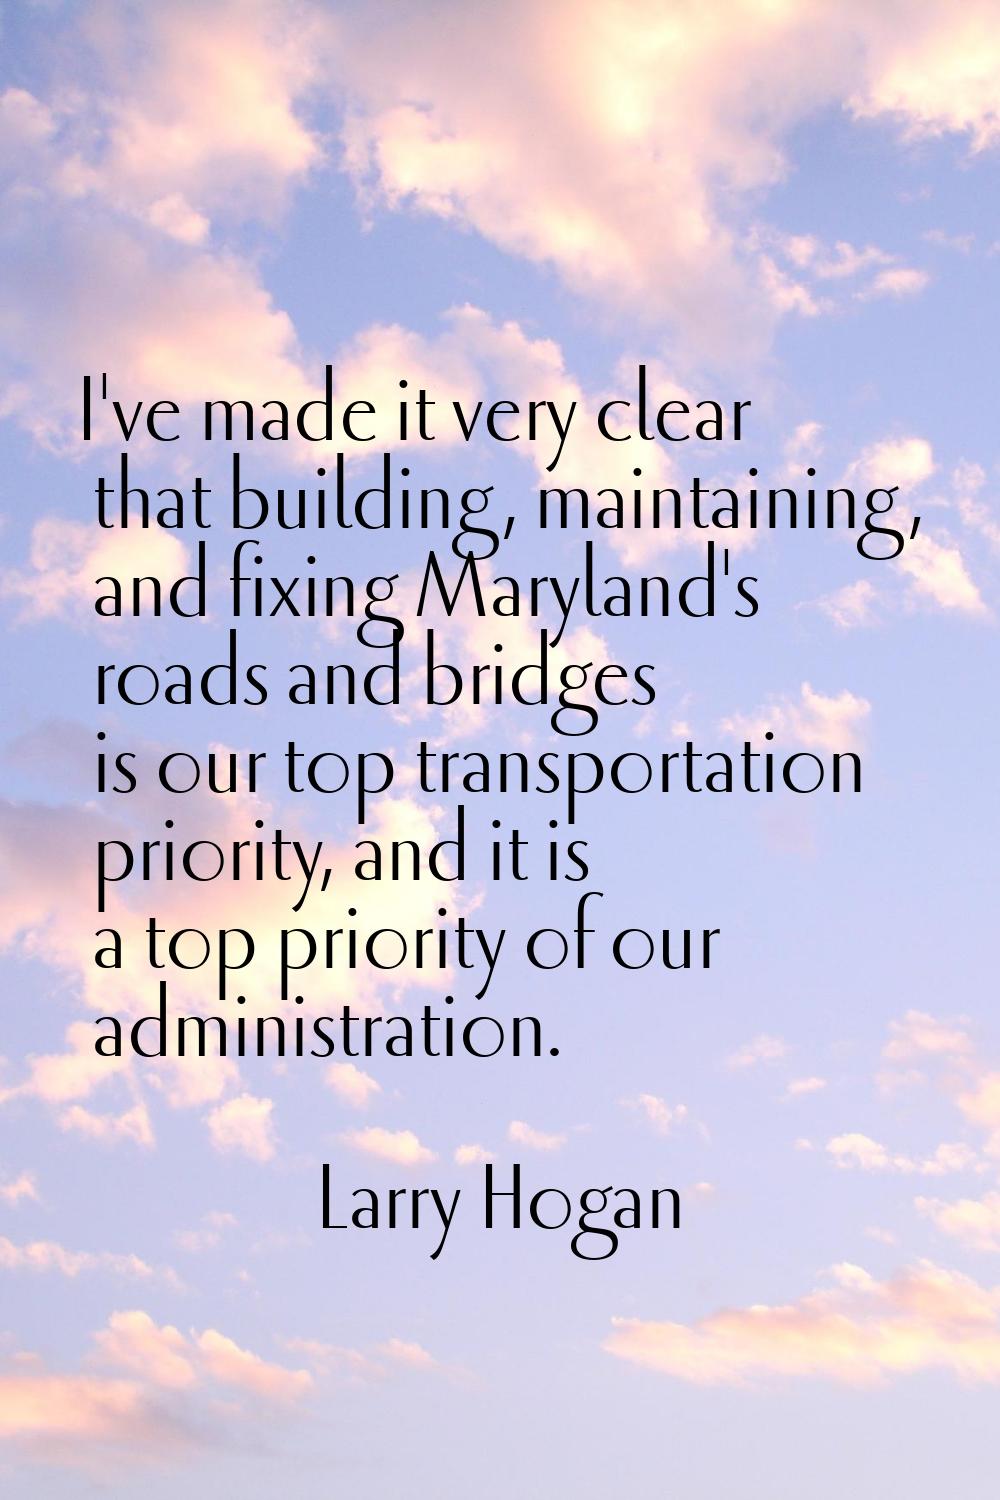 I've made it very clear that building, maintaining, and fixing Maryland's roads and bridges is our 